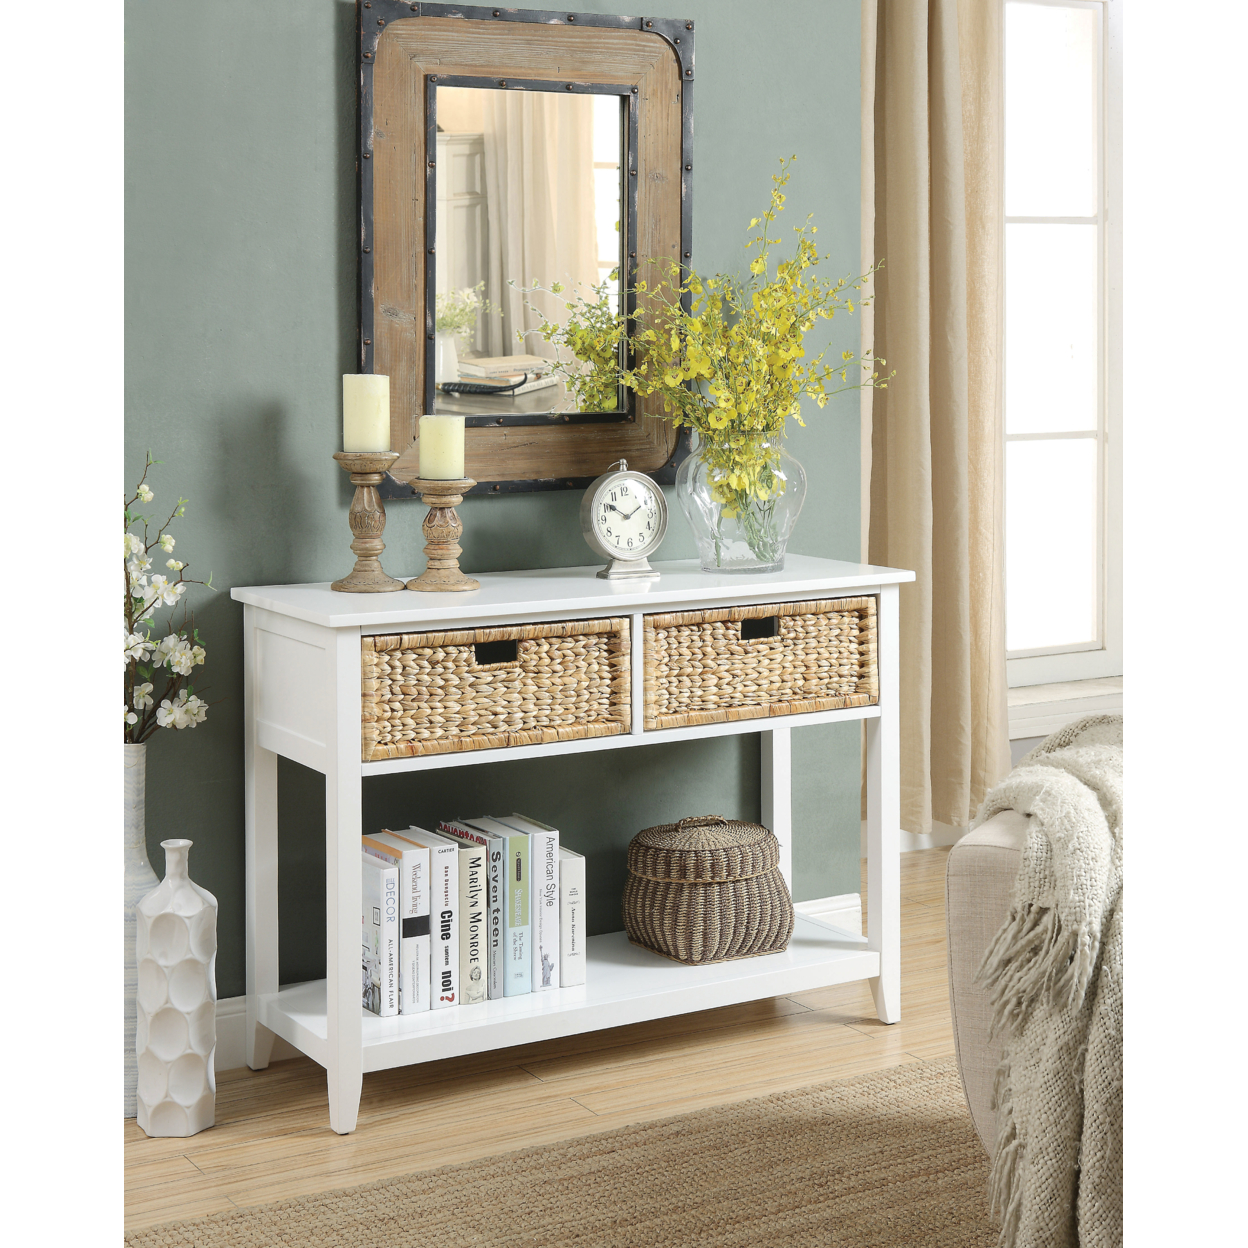 Flavius Console Table With 2 Drawers, White- Saltoro Sherpi